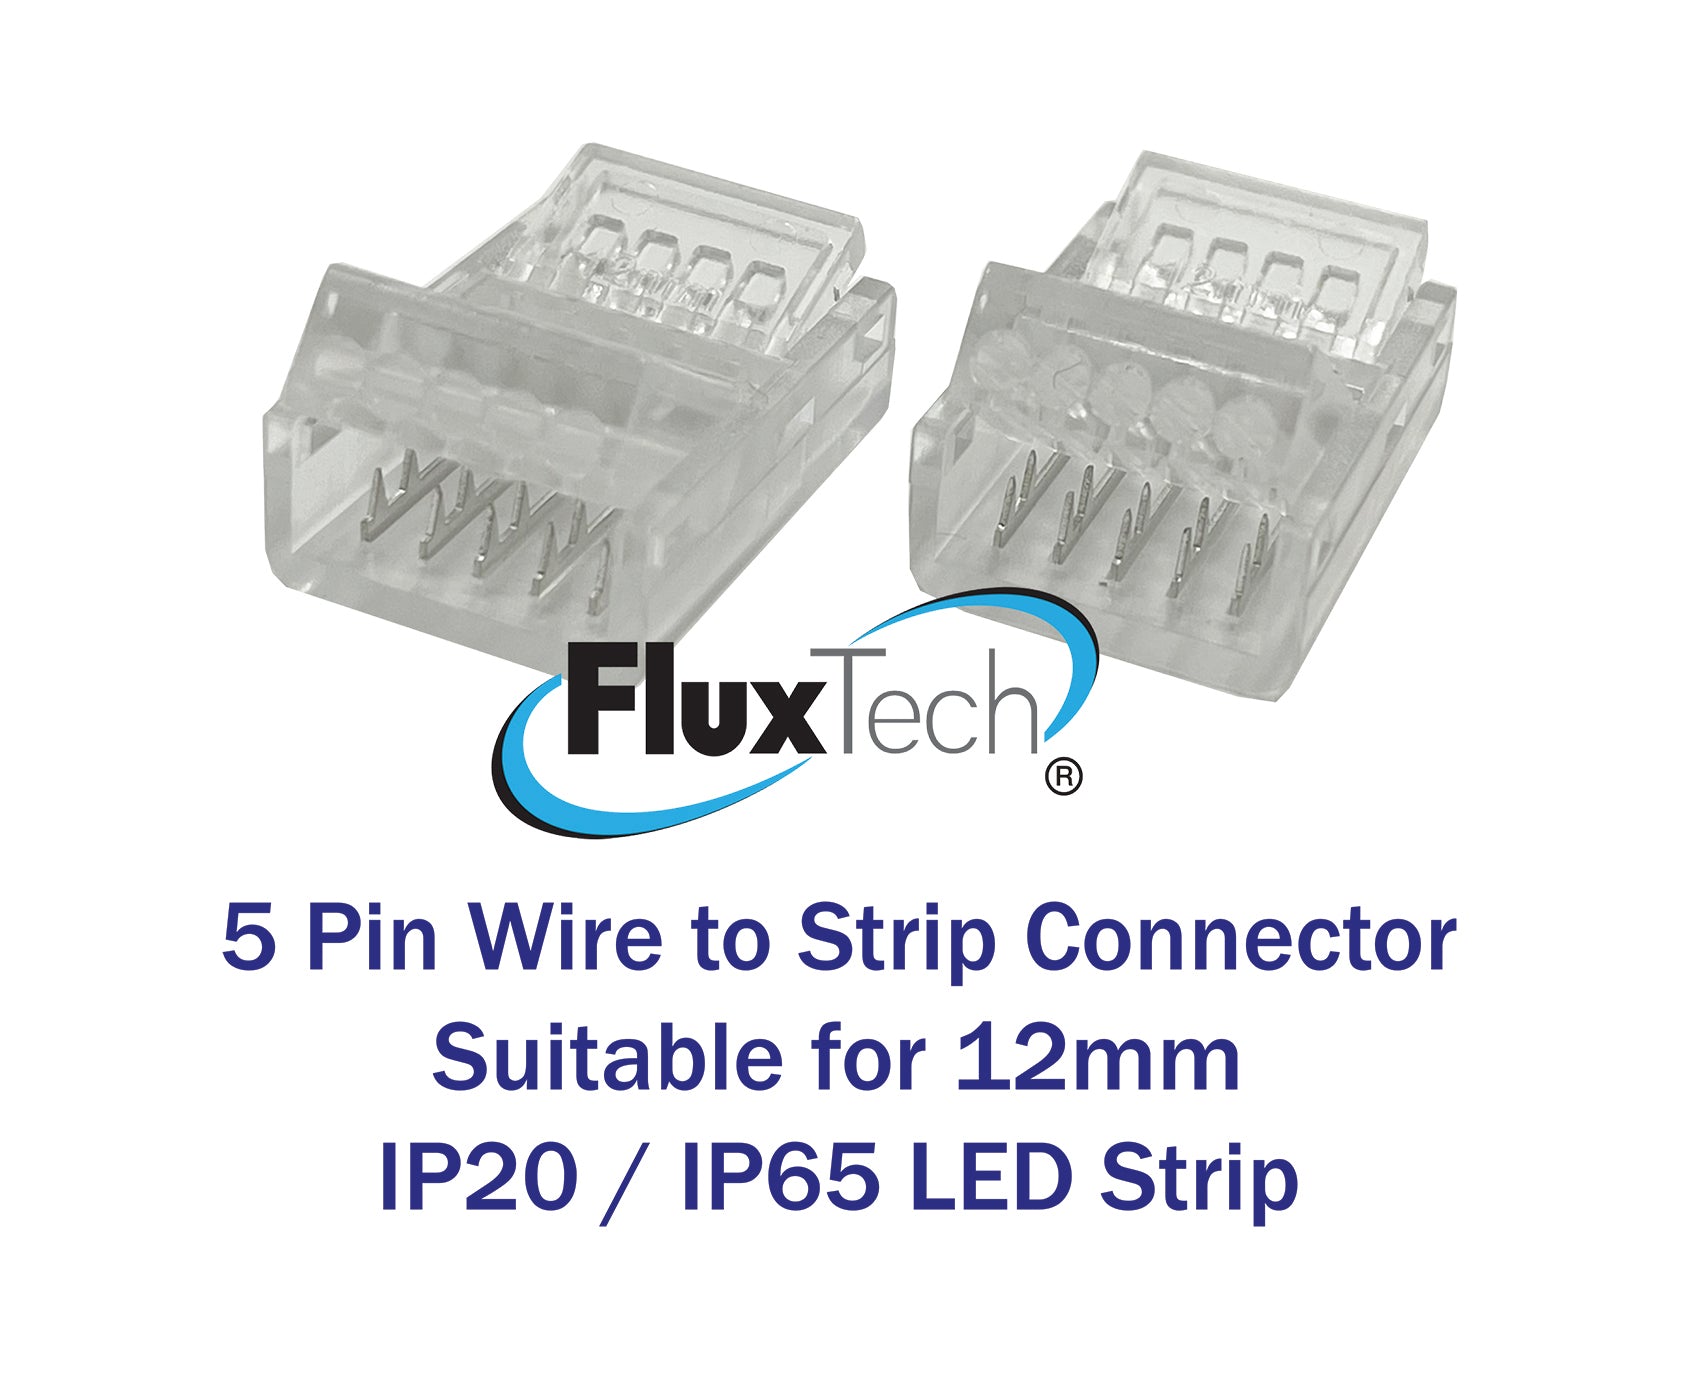 FluxTech - IP20 / IP65 Strip to Wire Crystal Connector for 10/12mm Strip.  Pack x 2 Pcs - 5 Pin